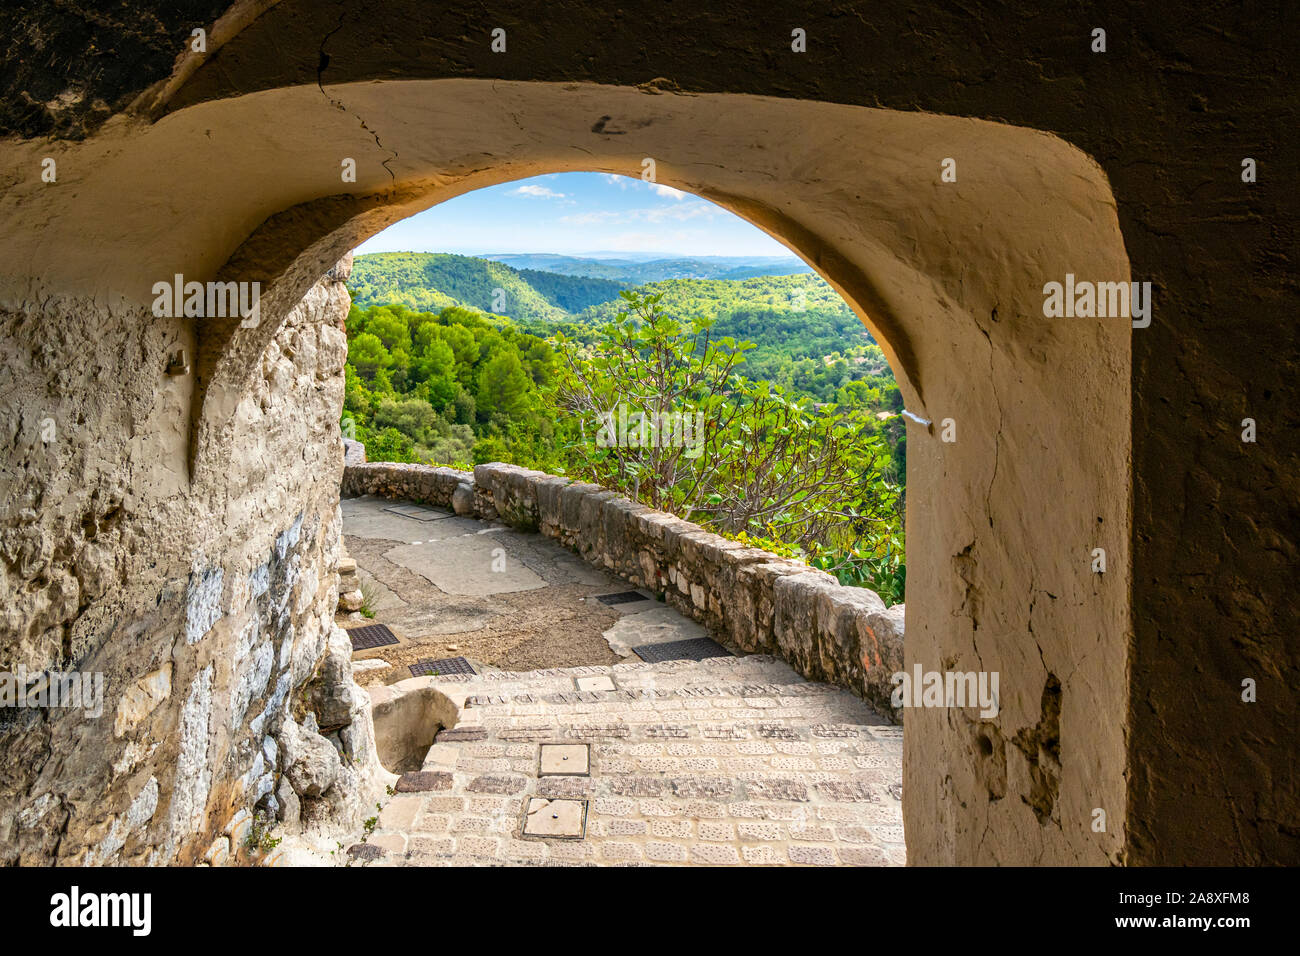 View through a stone arched doorway from the medieval hilltop village of Tourrettes-sur-Loup France of the Alpes-Maritimes mountains of Southern Franc Stock Photo